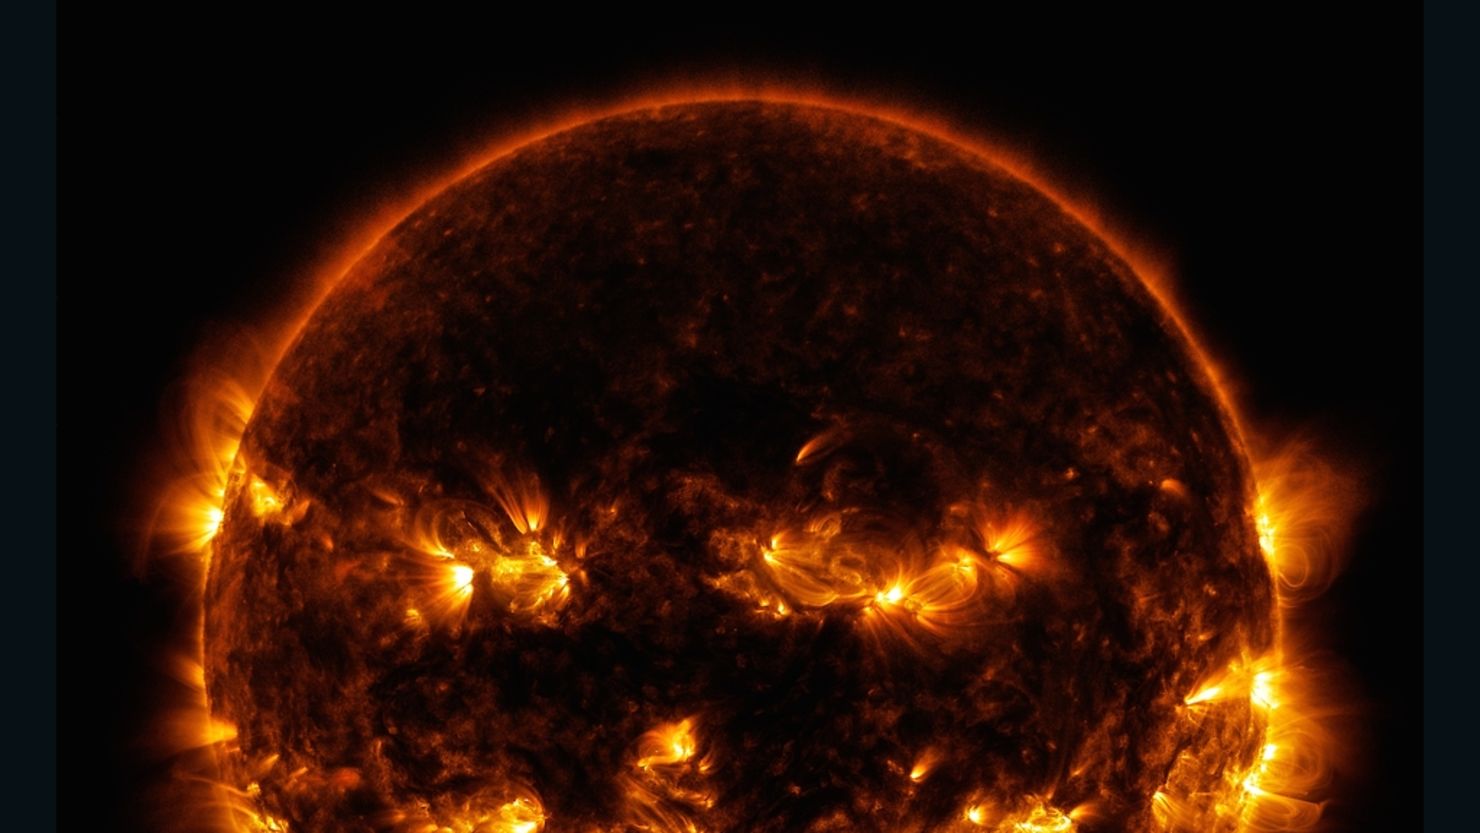 Active regions on the sun combined to resemble a jack-o-lantern's face on Oct. 8, 2014. The image was captured by NASA's Solar Dynamics Observatory, or SDO.